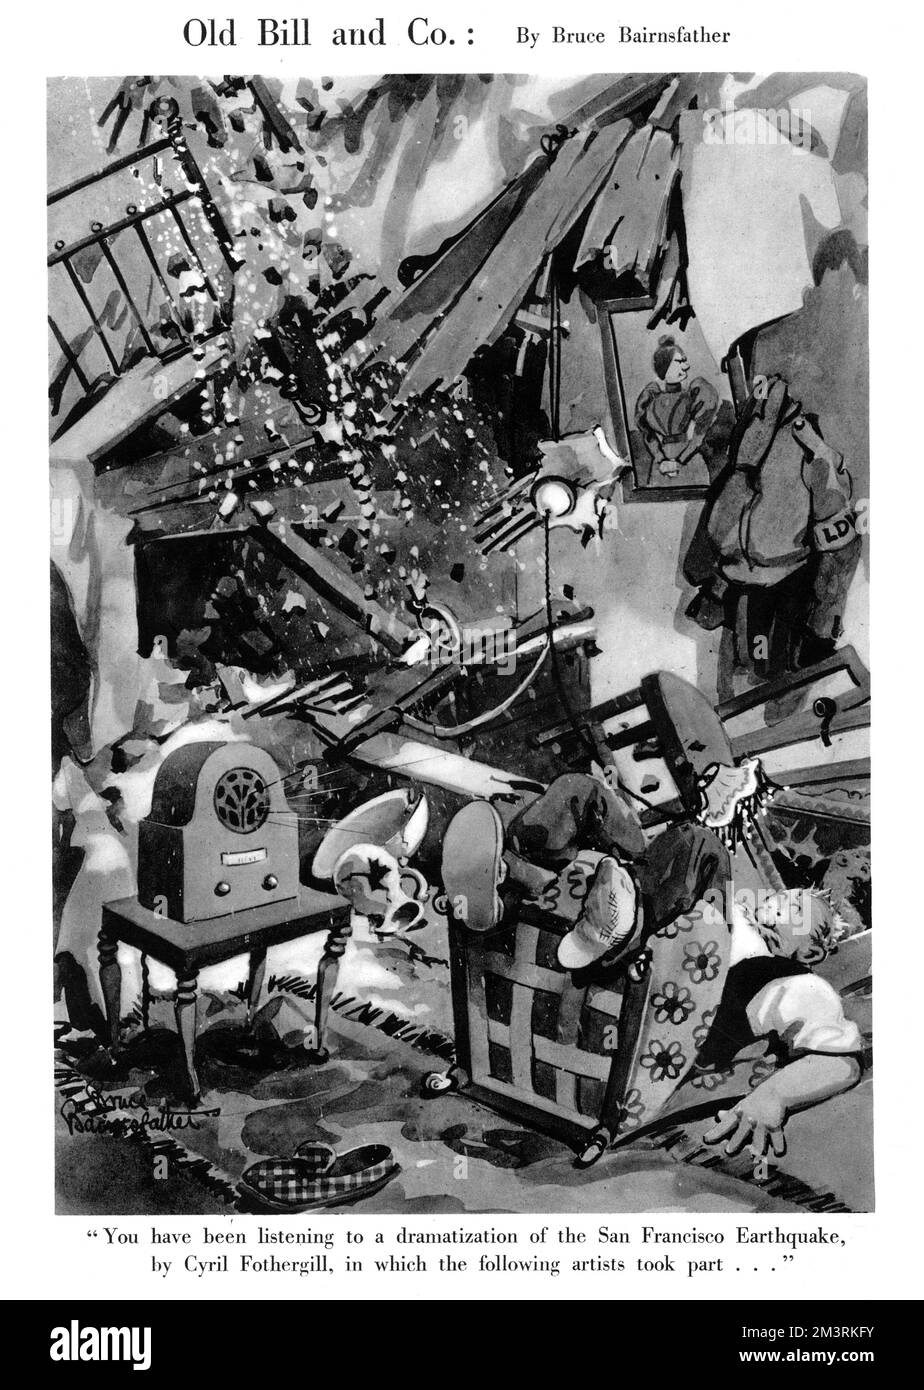 &quot;You have been listening to a dramatization of the San Francisco Earthquake by Cyril Fothergill, in which the following artists took part...&quot;  Bruce Bairnsfather likens the destruction being inflicted by the Luftwaffe during the Battle of Britain to the 1906 San Francisco earthquake.  1940 Stock Photo